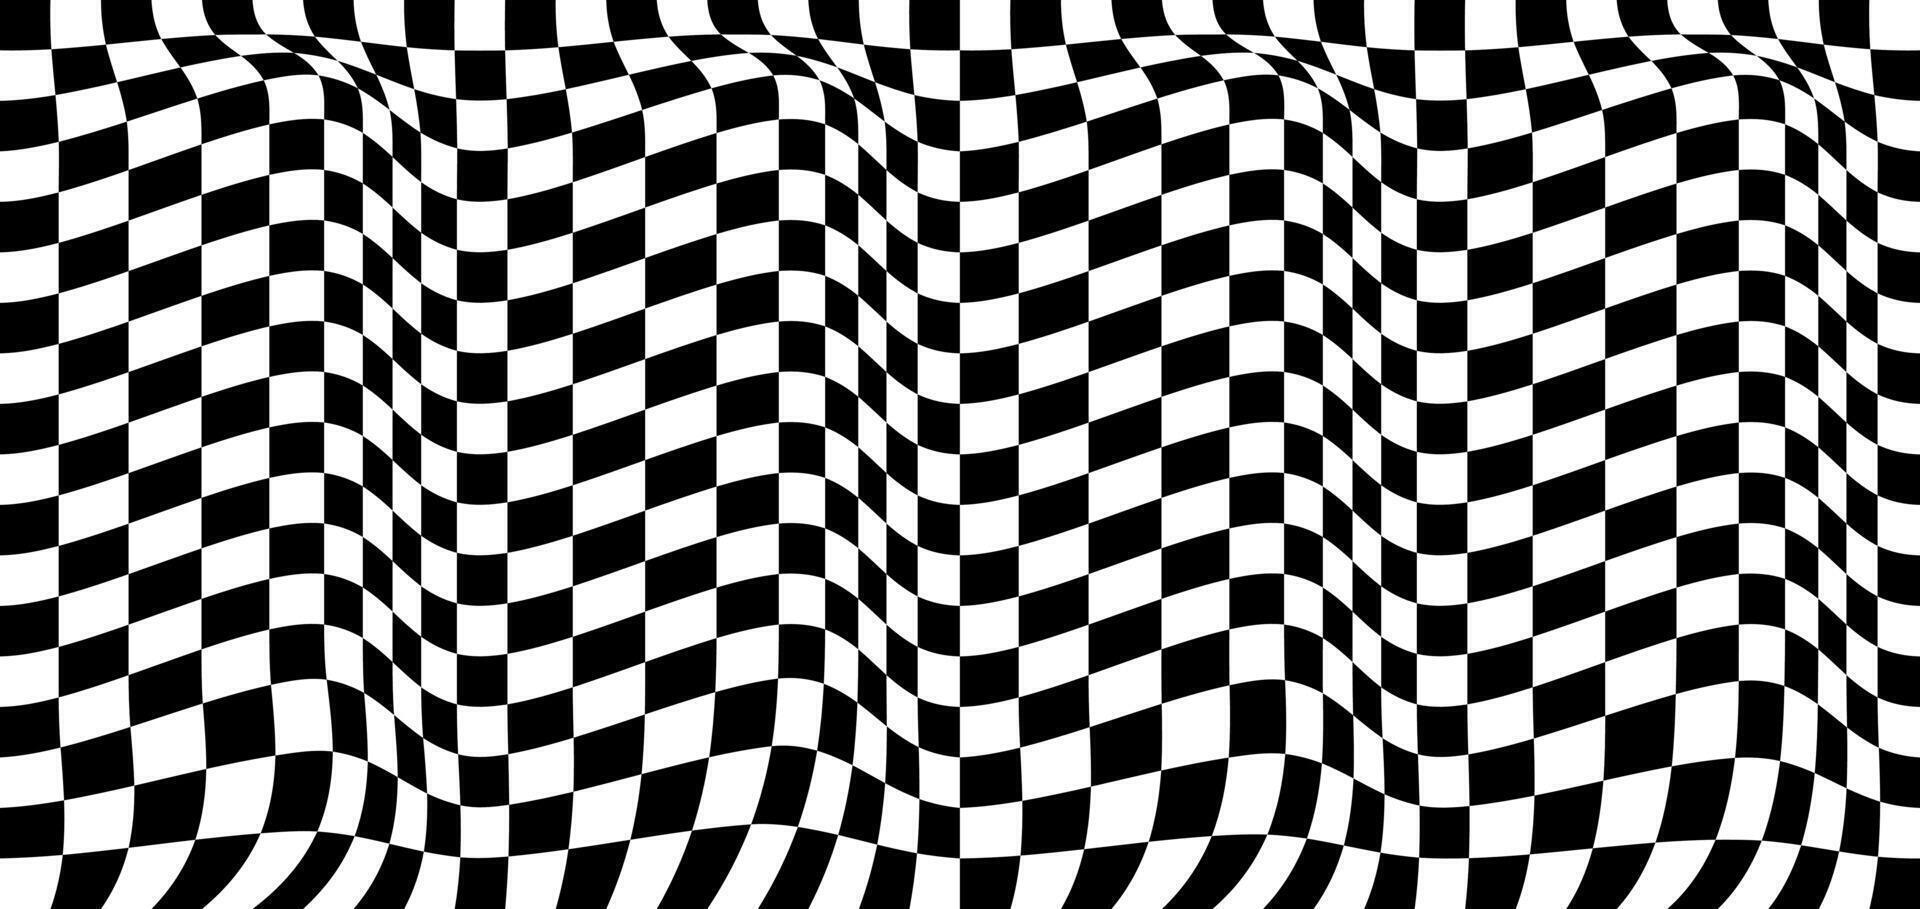 Chess distorted pattern. Seamless black and white checkered background. Rally finish flag texture. vector